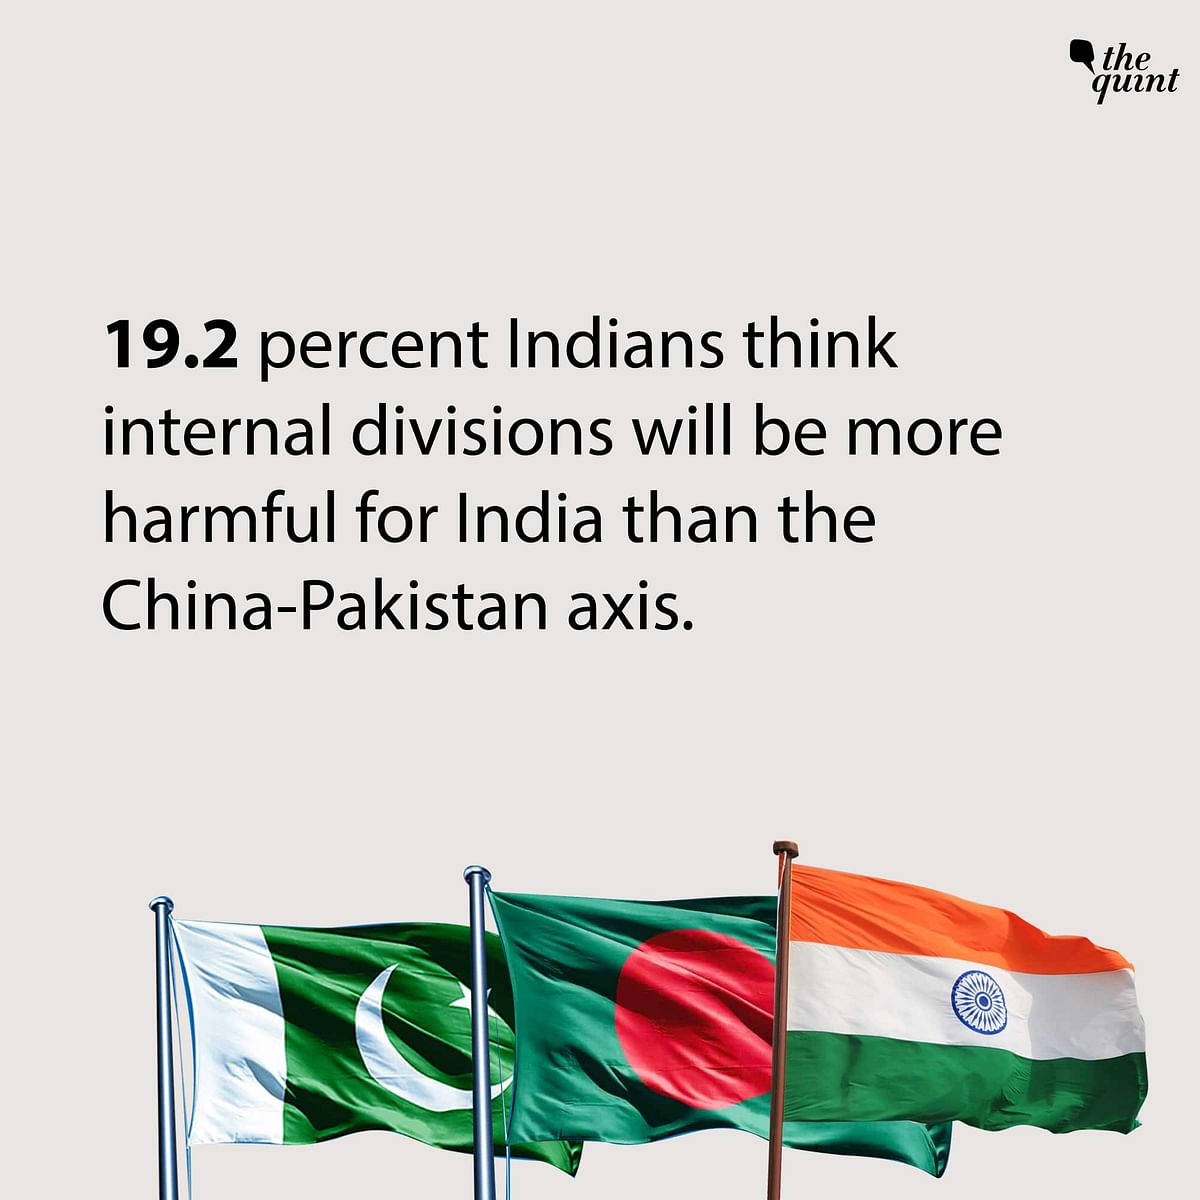 Meanwhile, 29.5 percent respondents said that the creation of Bangladesh had helped India a lot. 